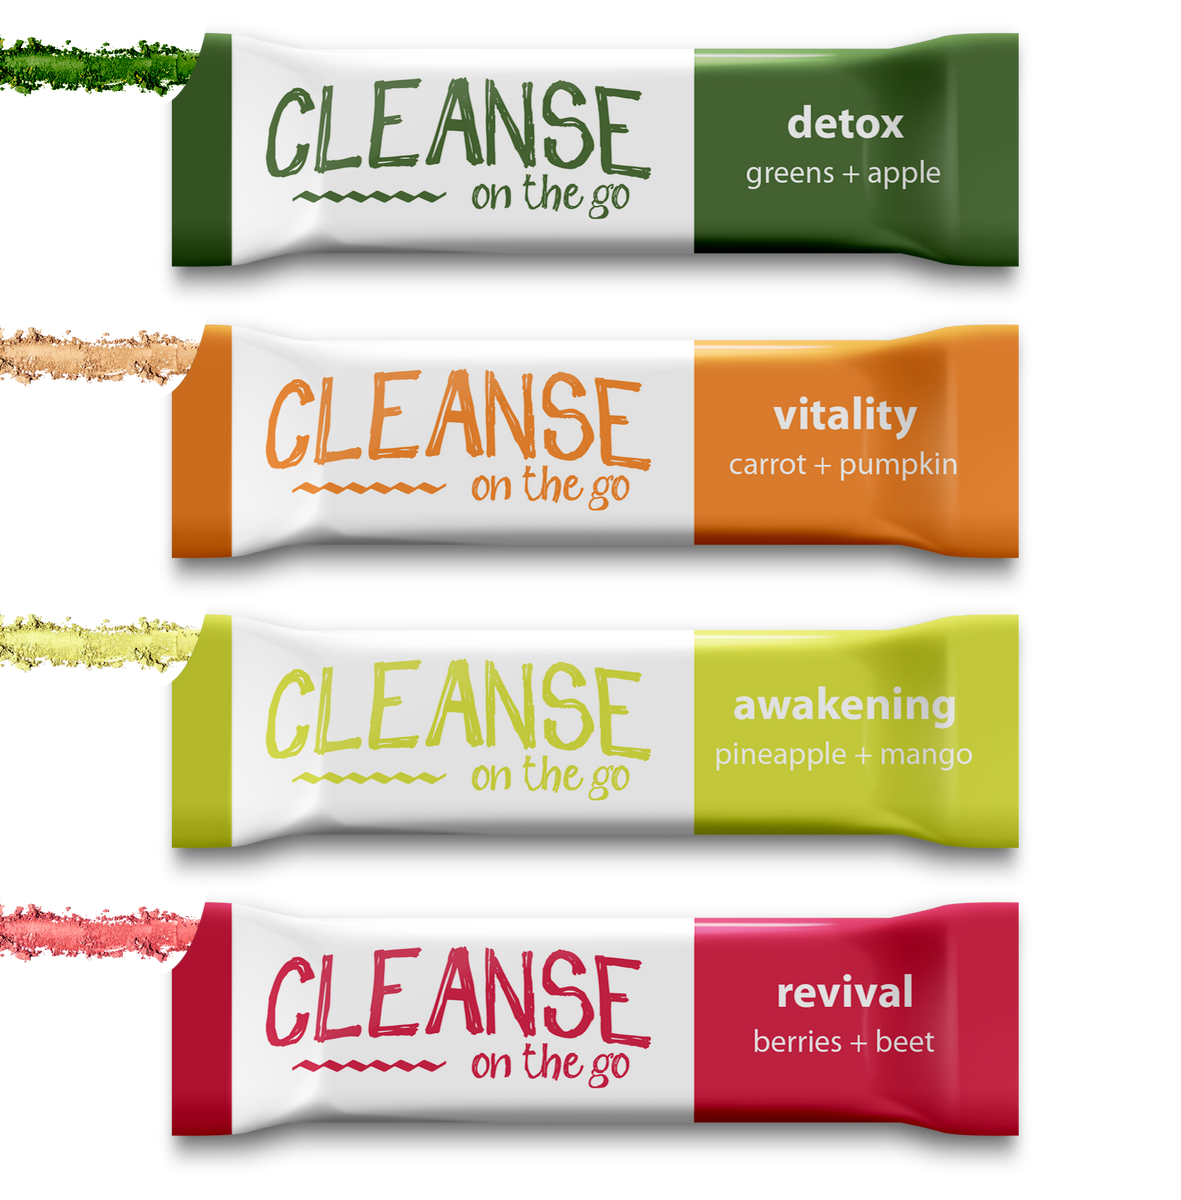 CLEANSE on the go